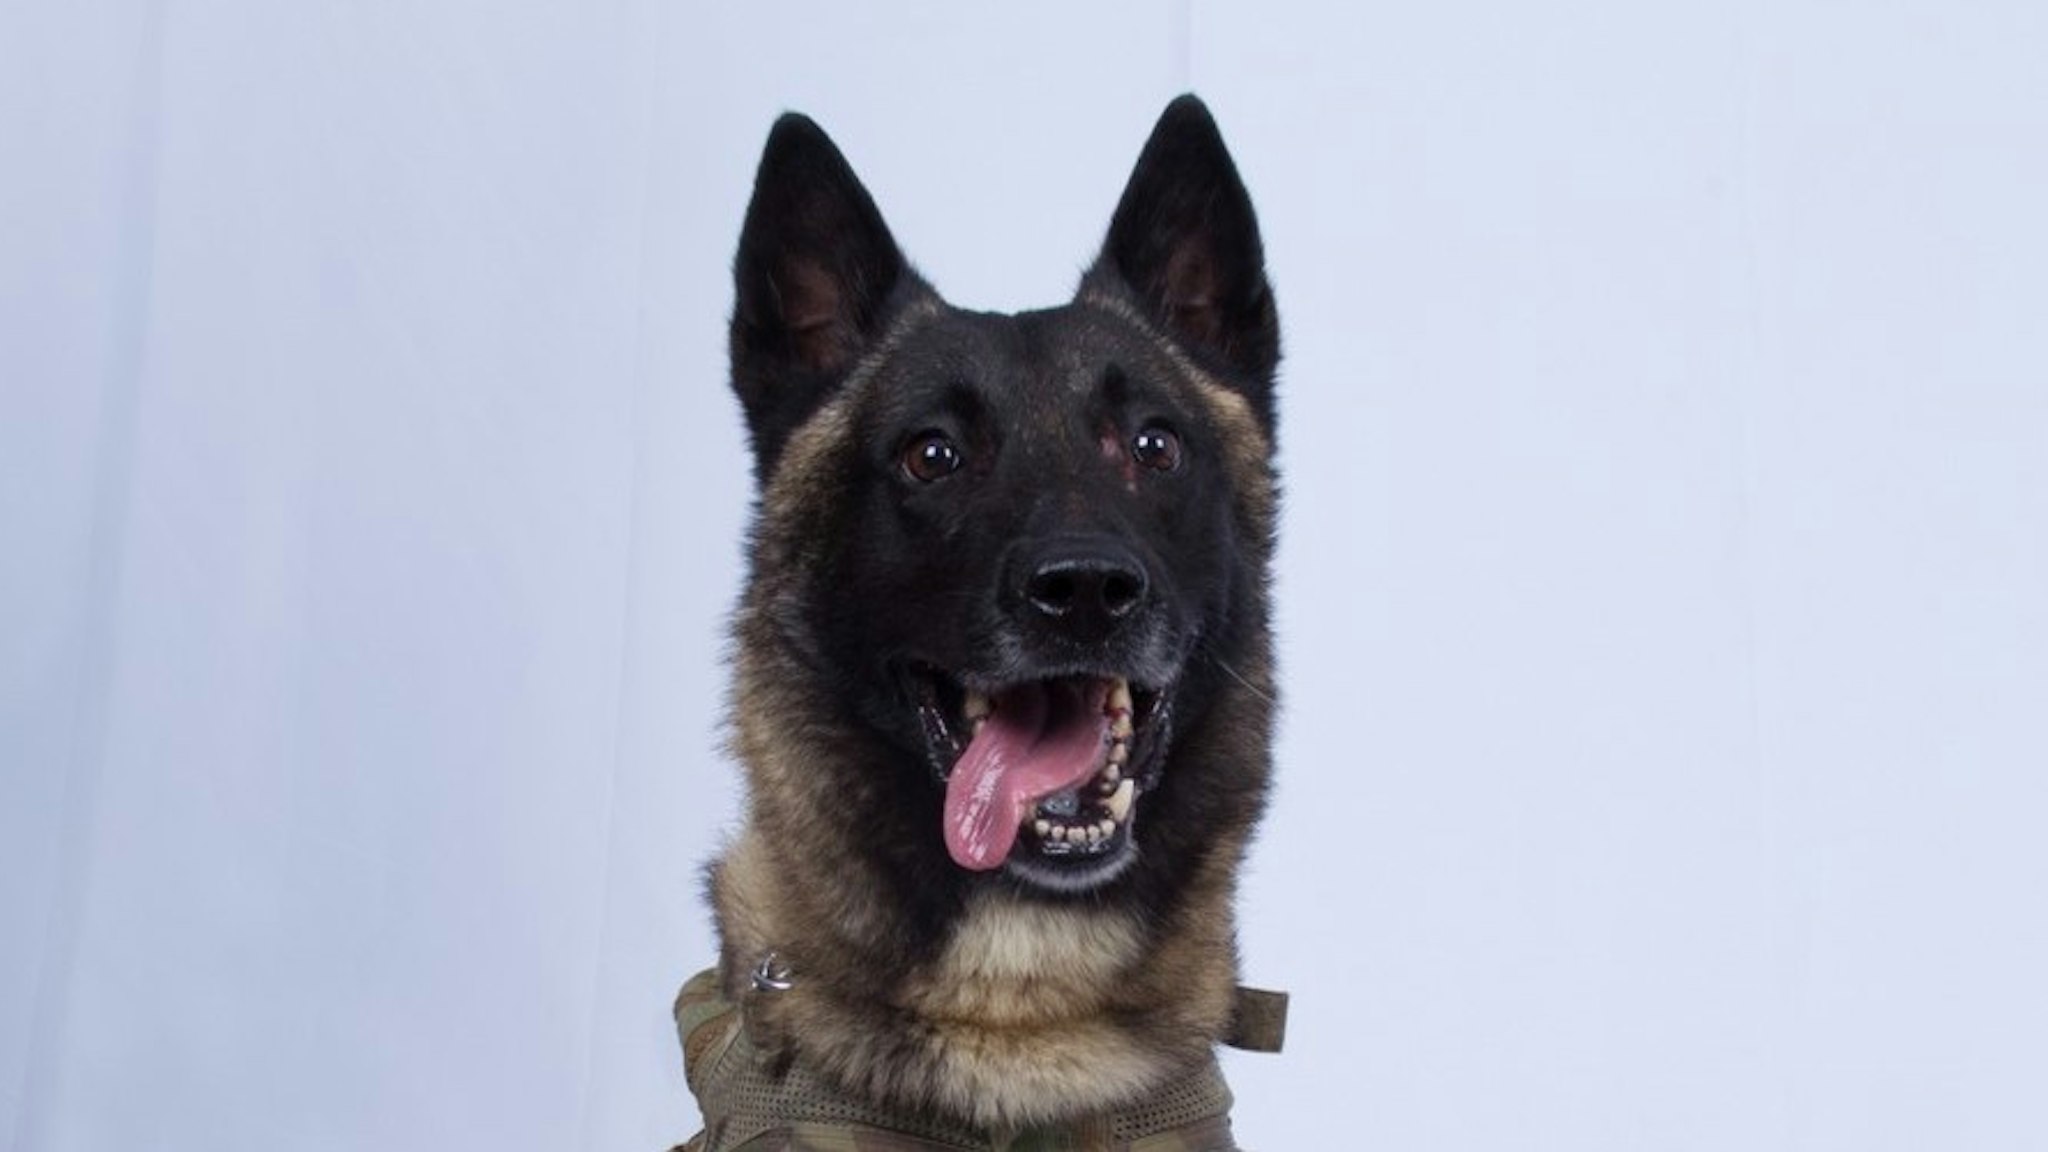 The military working dog who sustained minor injuries during the raid has returned to duty.